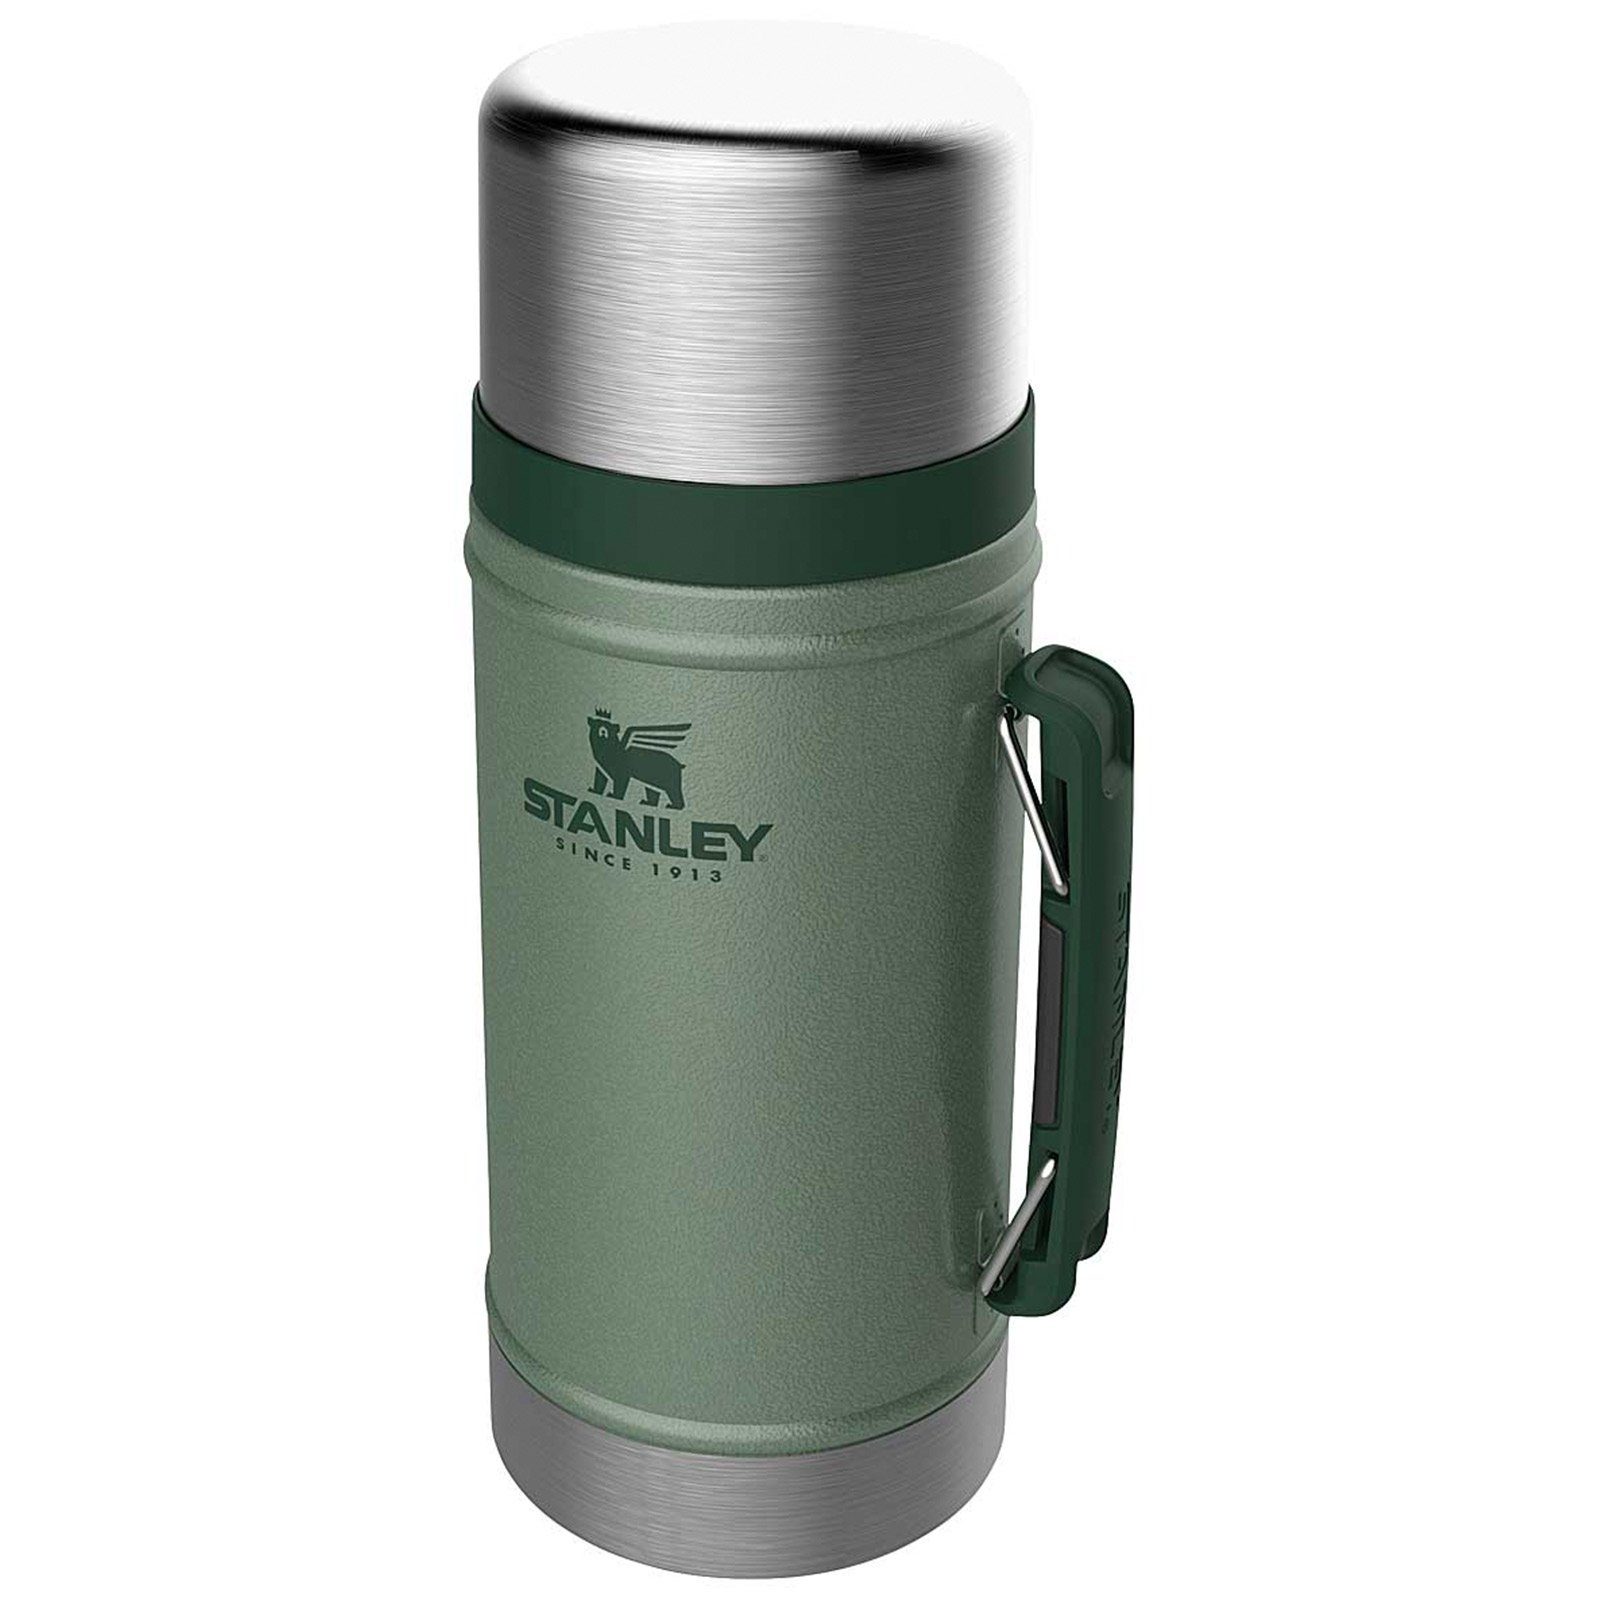 STANLEY Thermobehälter Classic Isolierbehälter Essen 0,94L Container 18/8, Food Behälter Griff Thermo, Grün Edelstahl